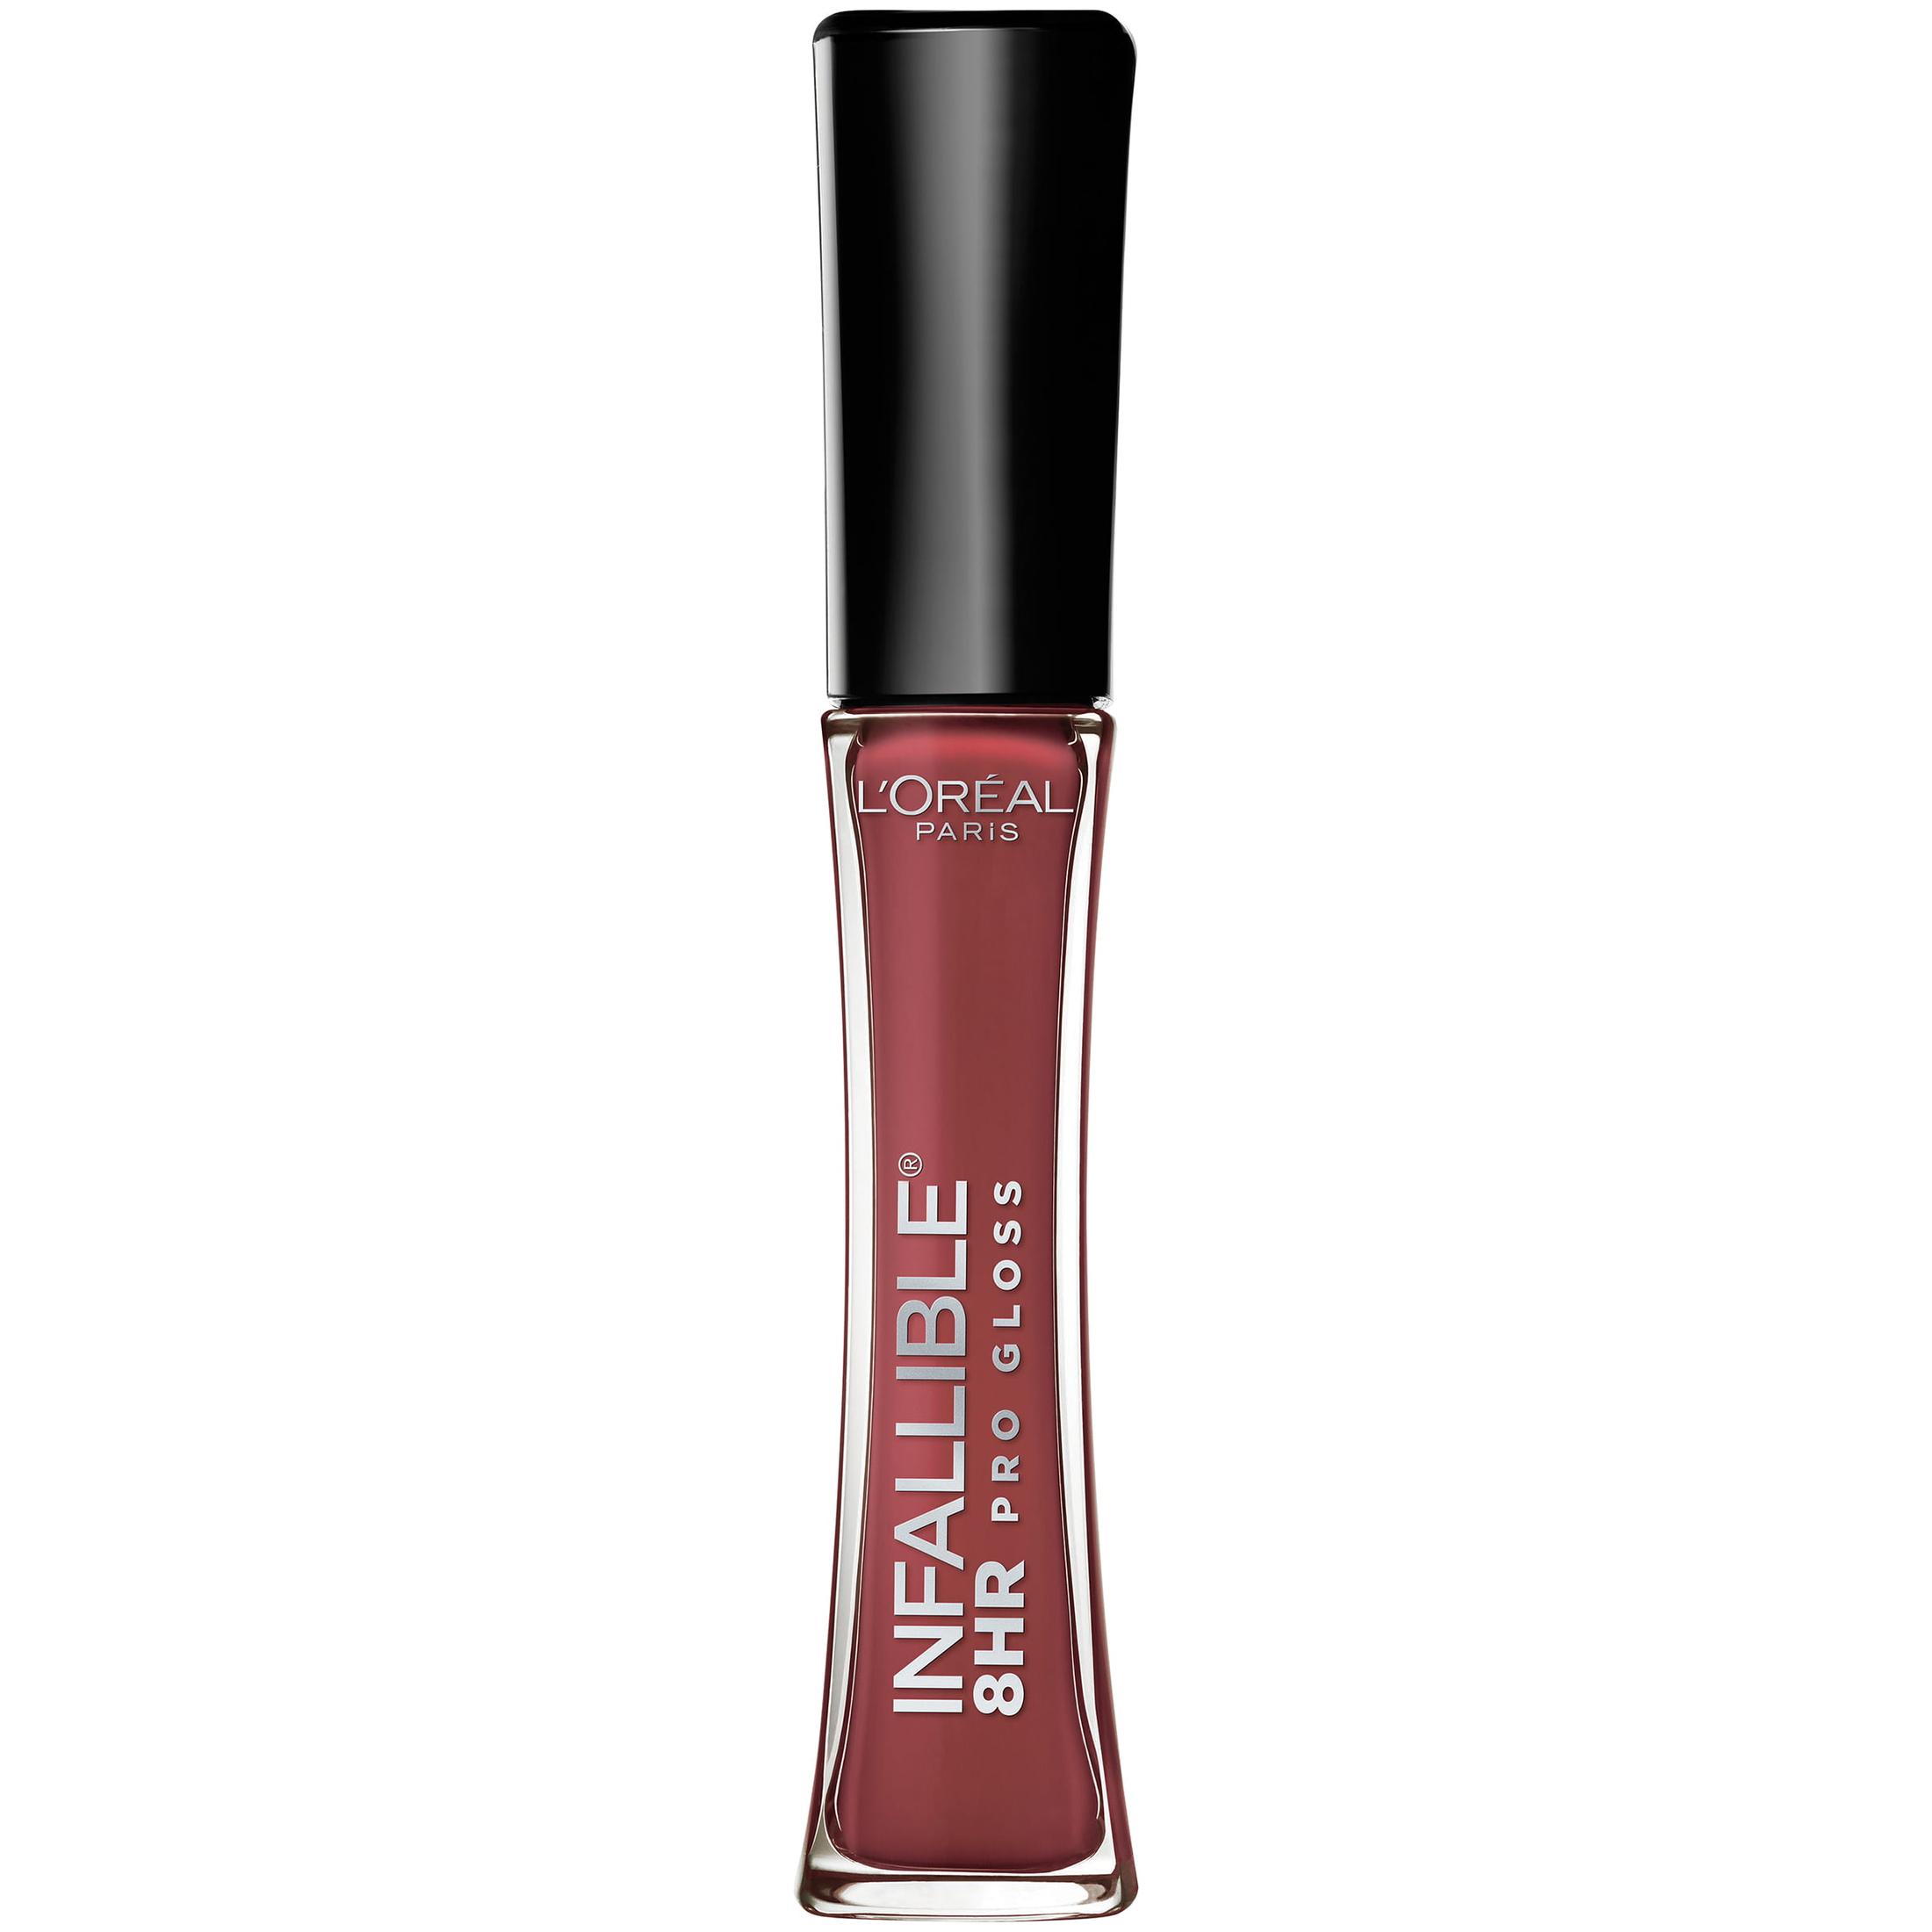 L'Oreal Paris Infallible 8 Hour Pro Hydrating Lip Gloss, Sangria - image 1 of 5